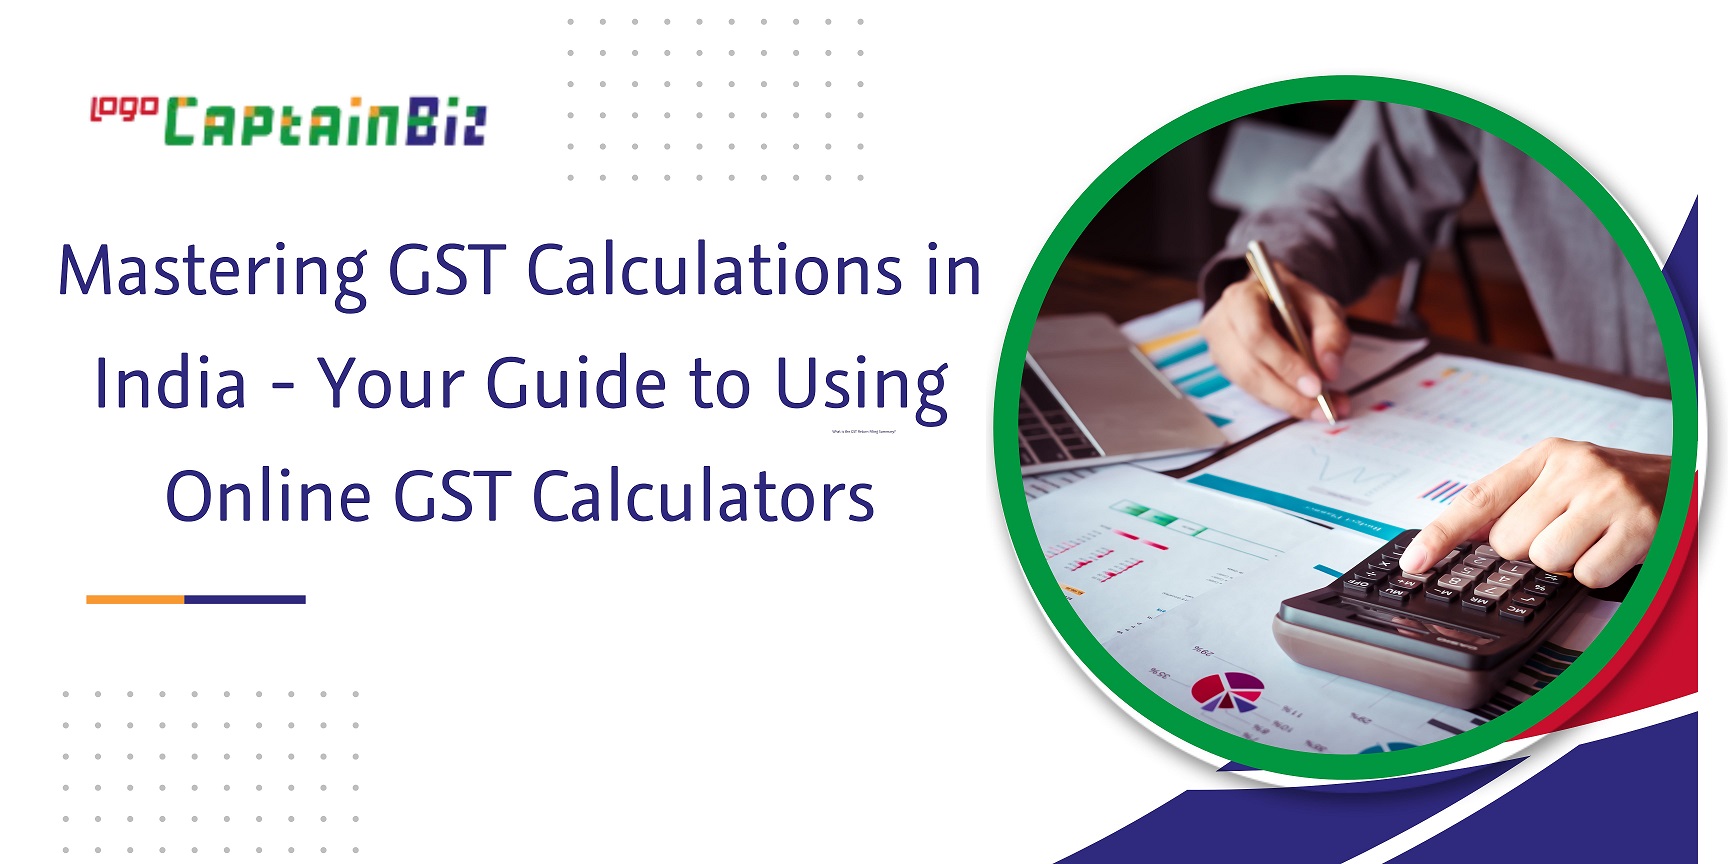 CaptainBiz: mastering gst calculations in india your guide to using online gst calculators